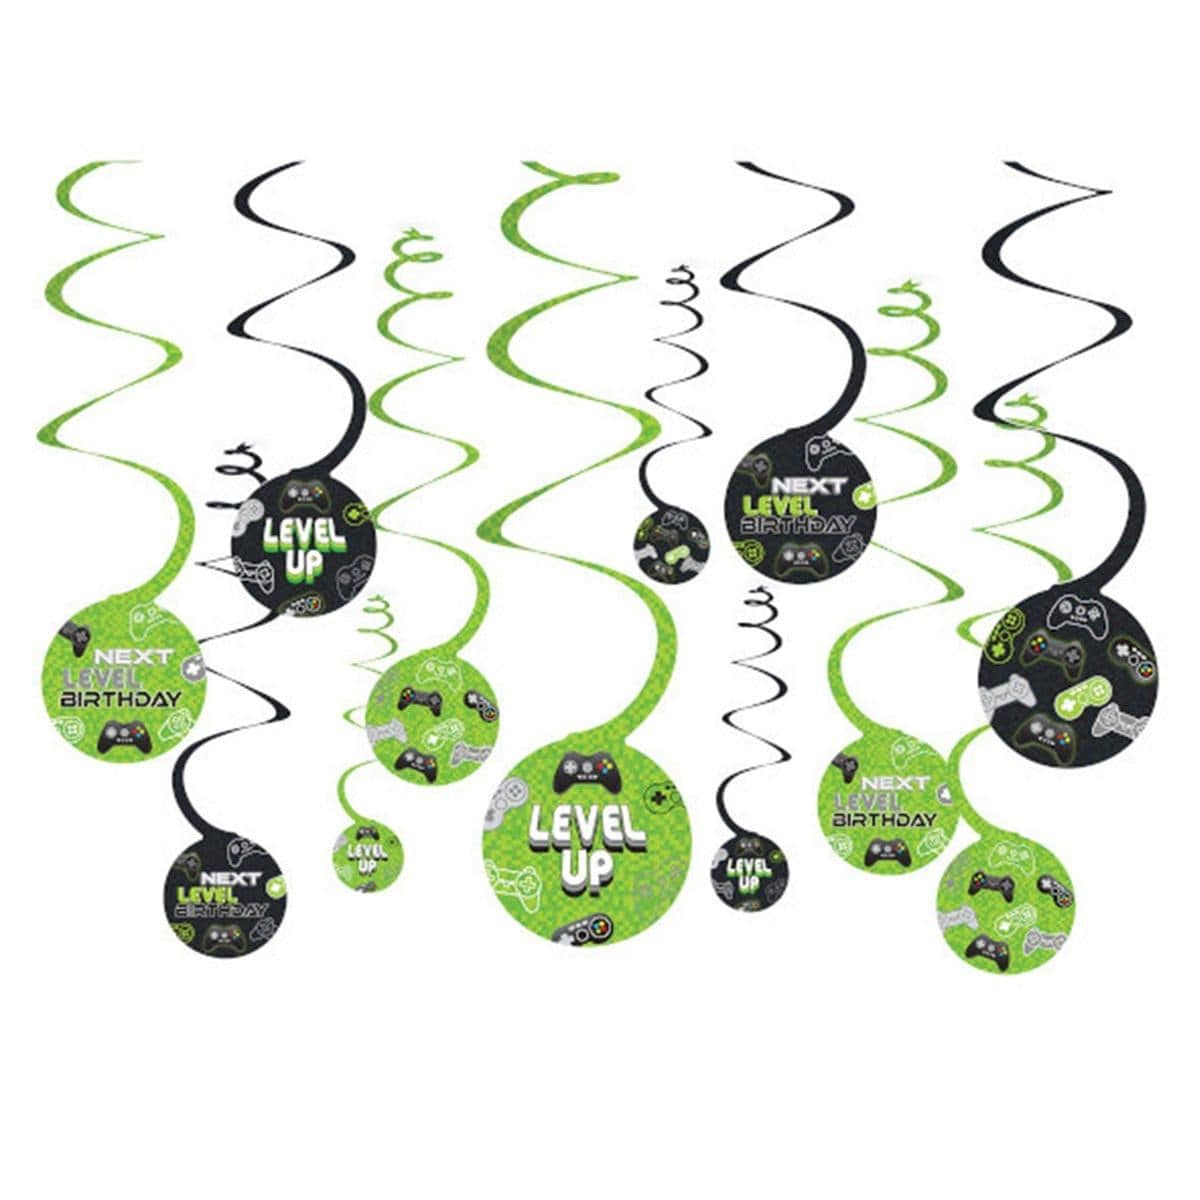 Buy Kids Birthday Level Up swirl decorations, 12 per package sold at Party Expert